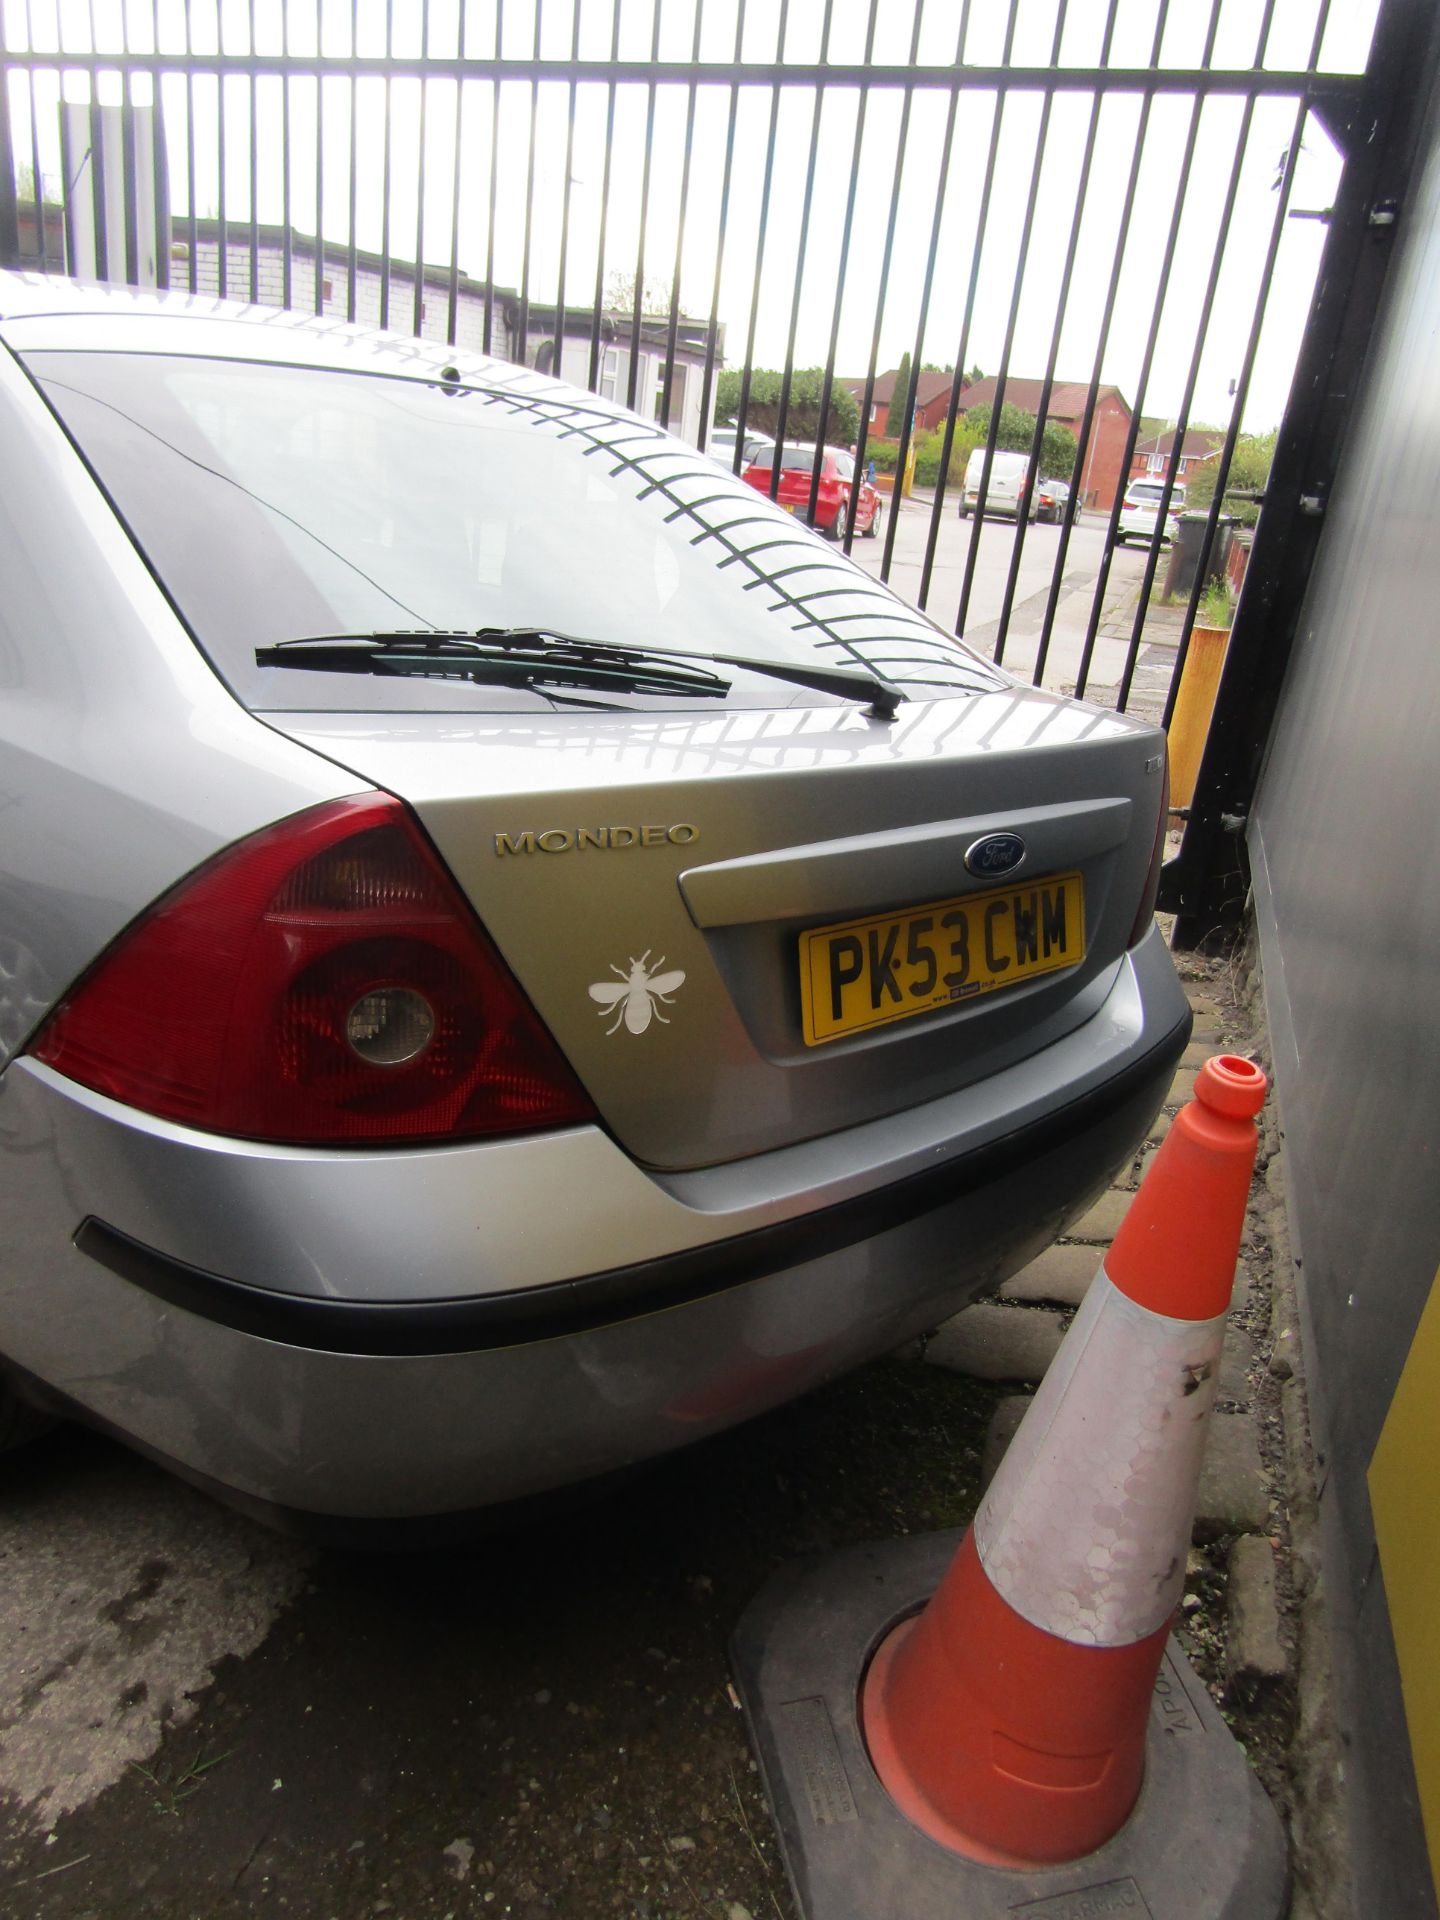 2003 Ford Mondeo Graphite 2.0 TDCI, MOT until 13th September, 89,010 miles (unchecked) comes with - Image 3 of 10